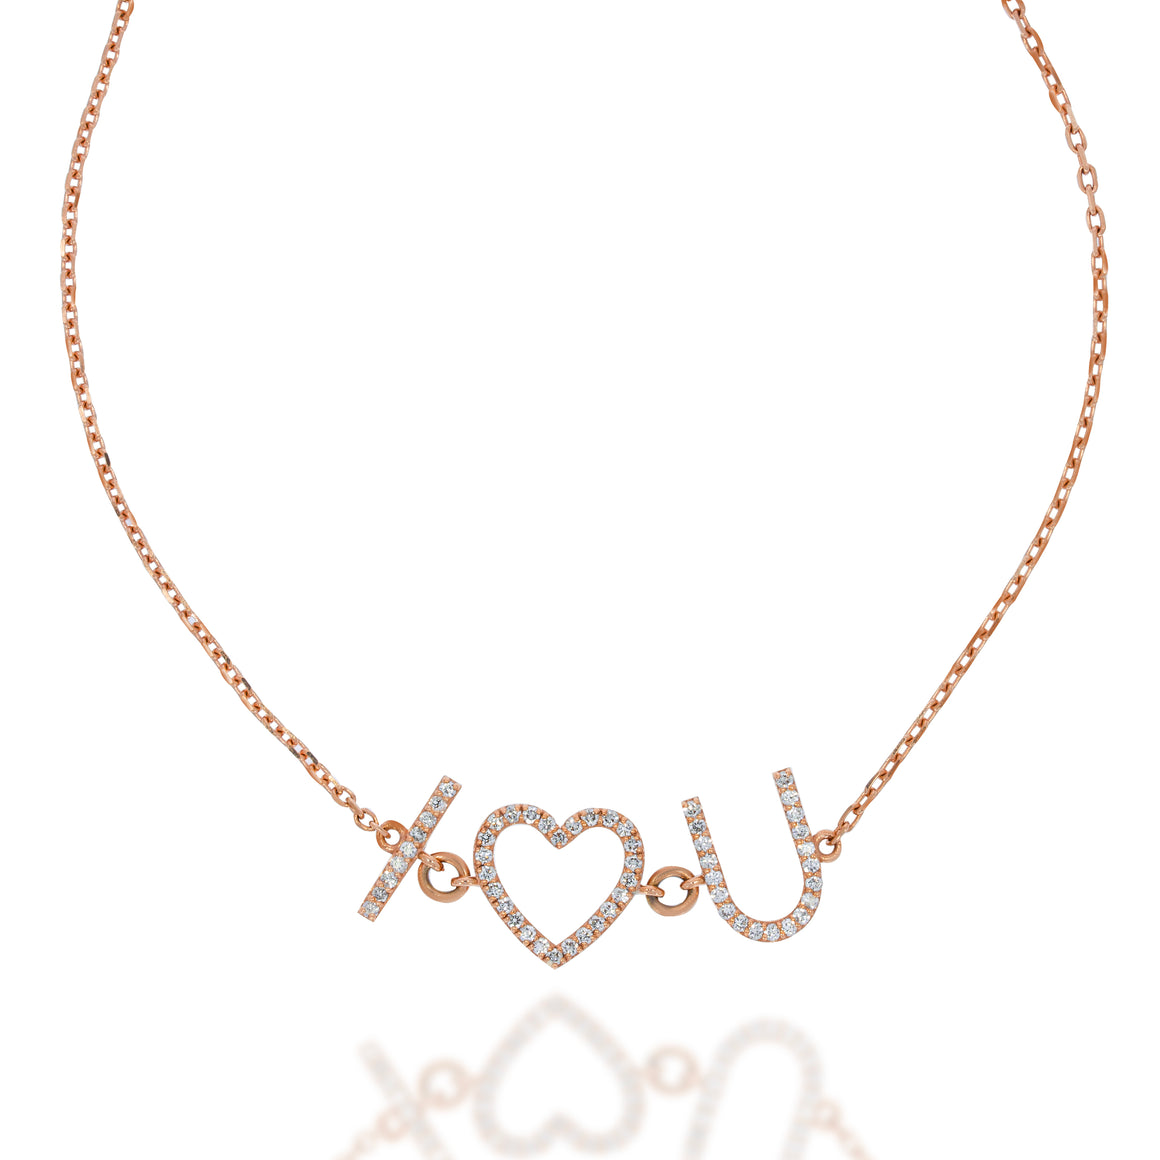 Pave diamonds I LOVE YOU in 18k Rose gold diamond chain bracelet. Because there is nothing more beautiful than a declaration of love.